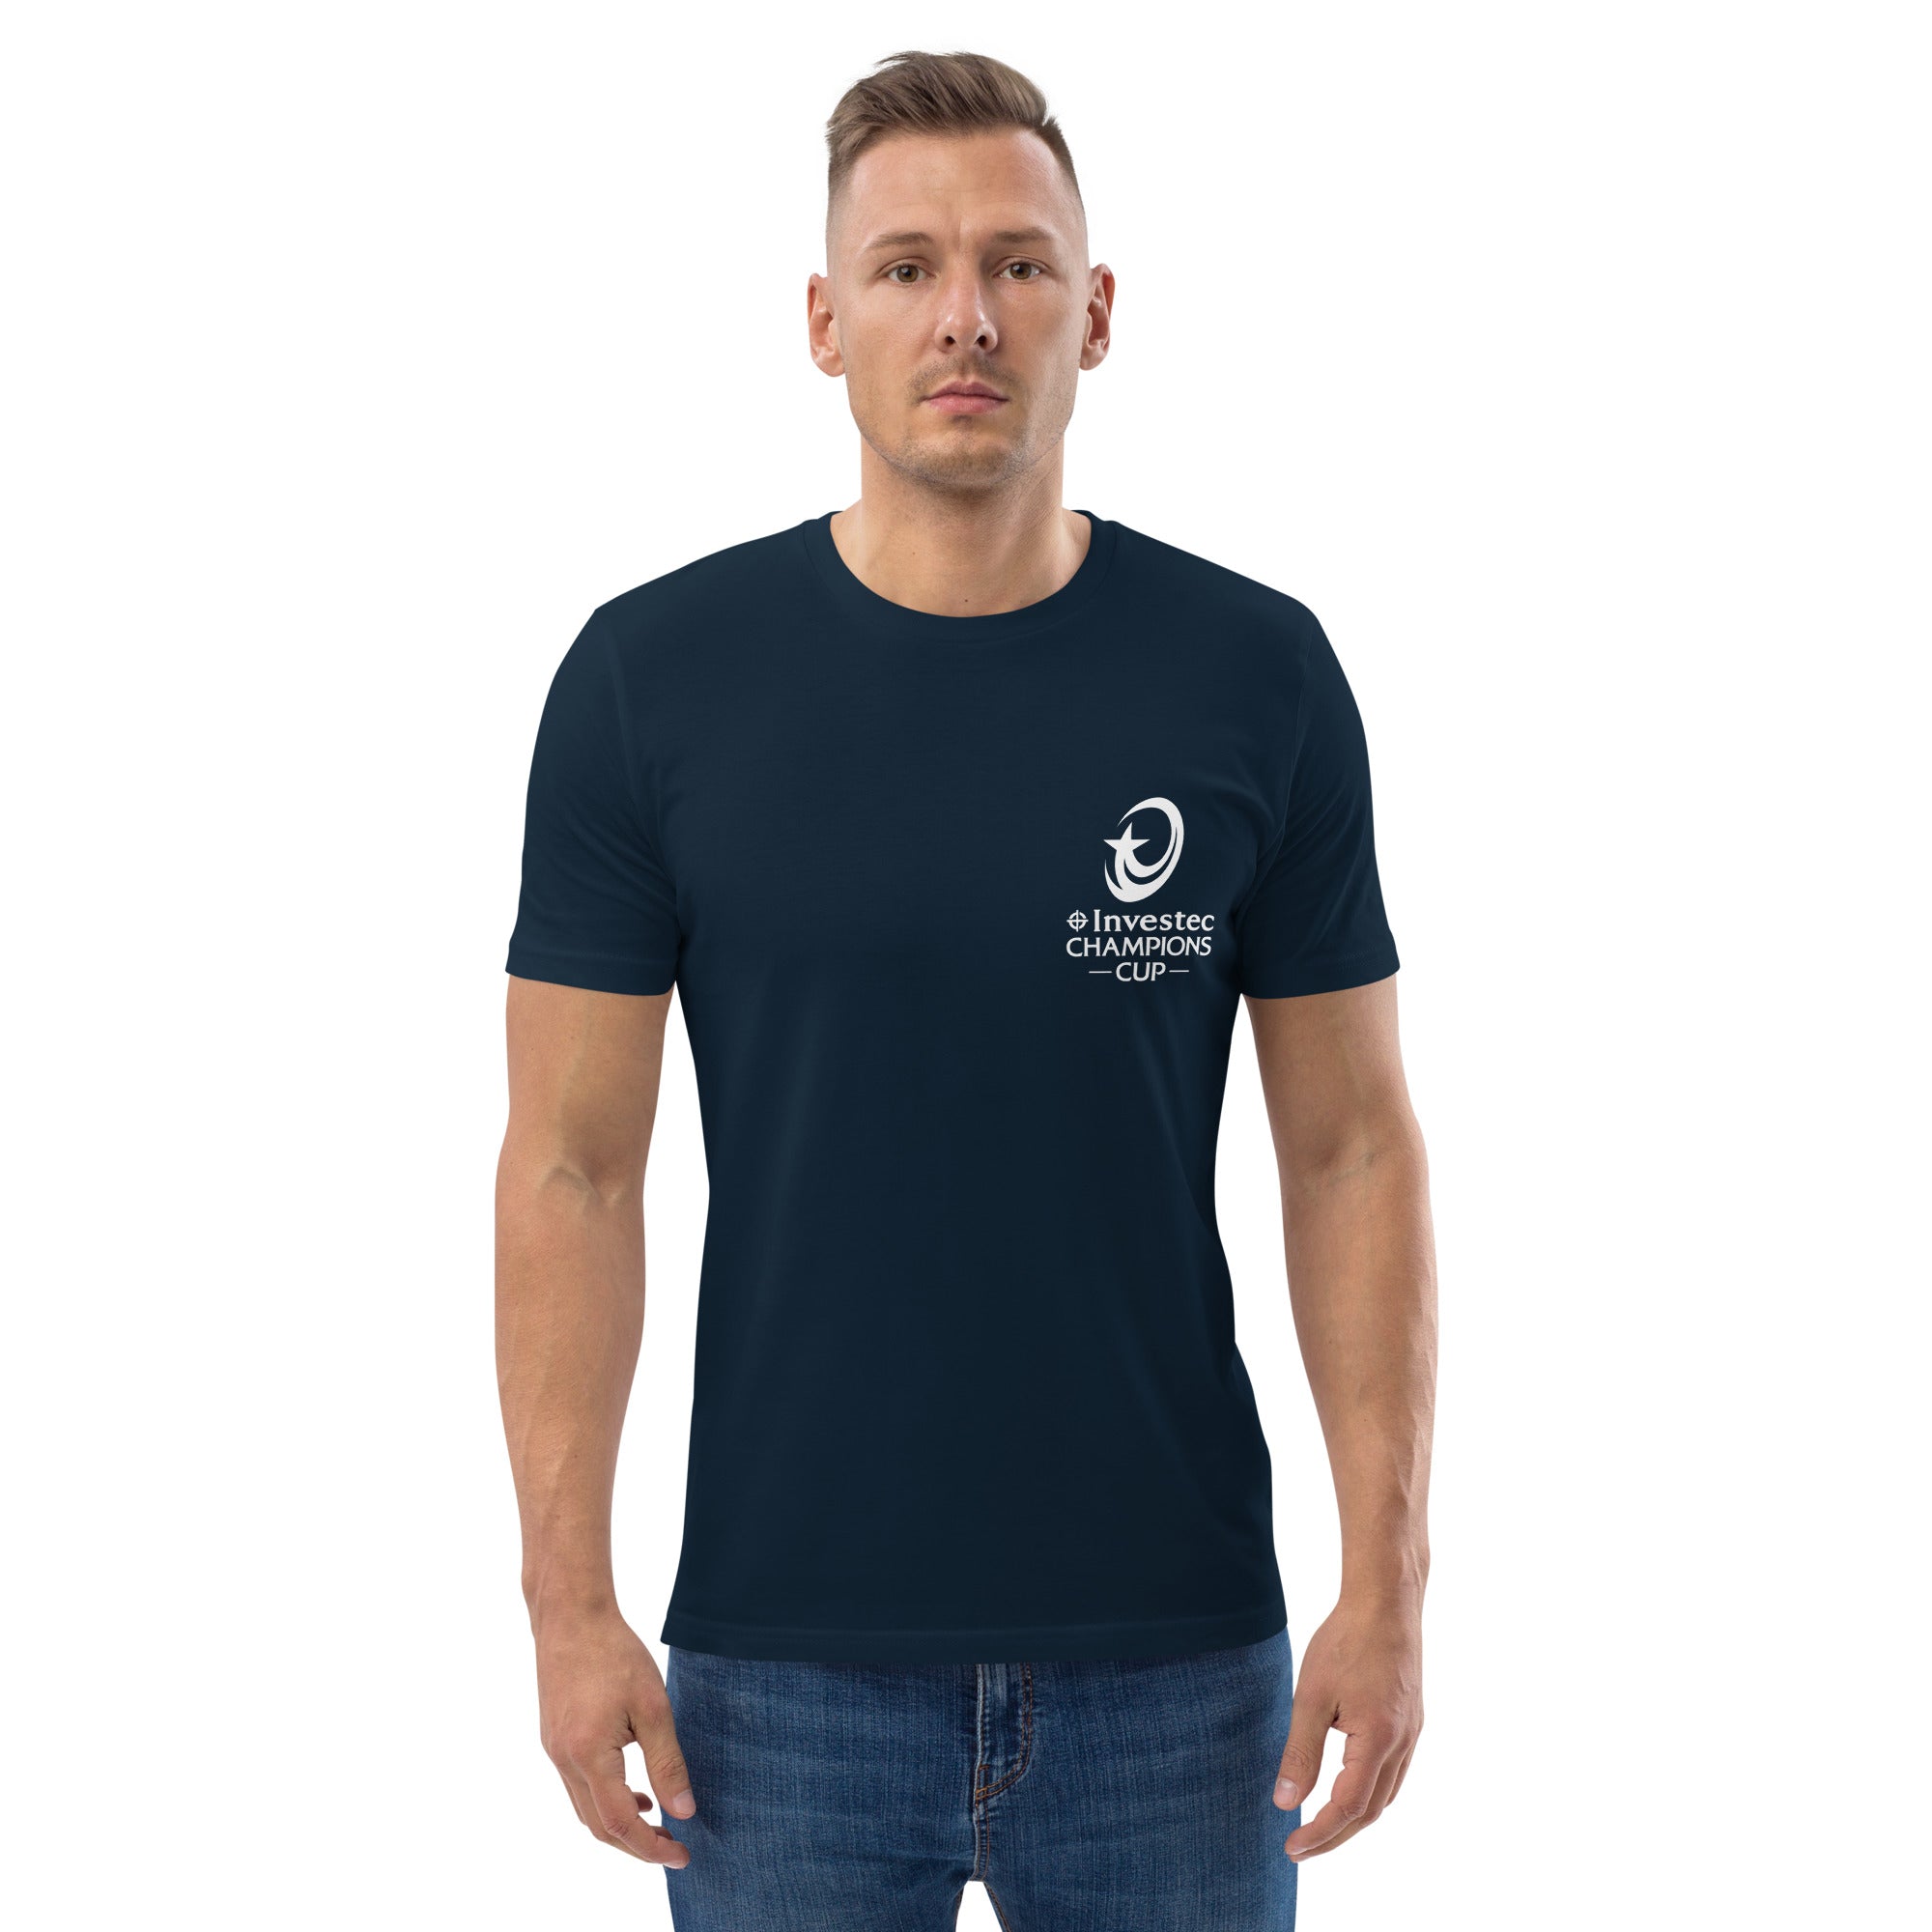 Investec Champions Cup T-Shirt